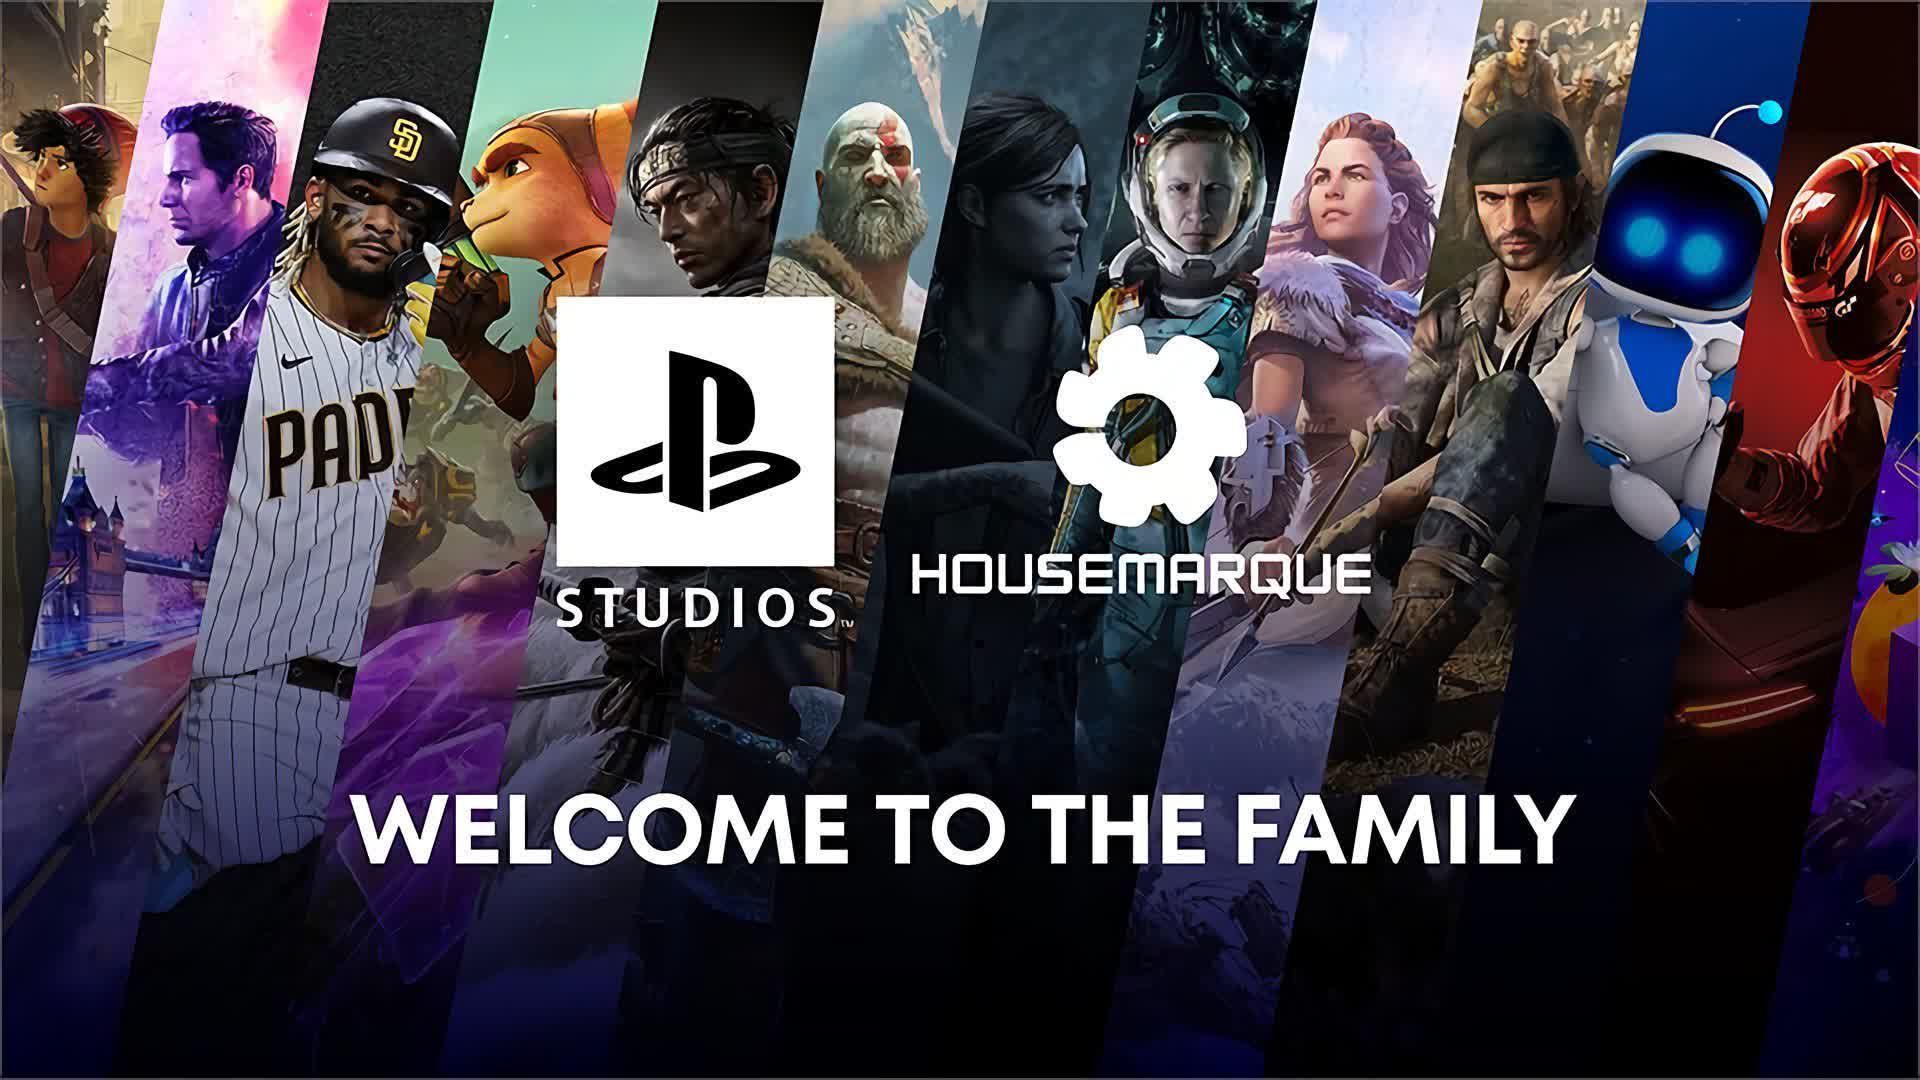 Sony buys studio Housemarque and possibly Bluepoint Games as well